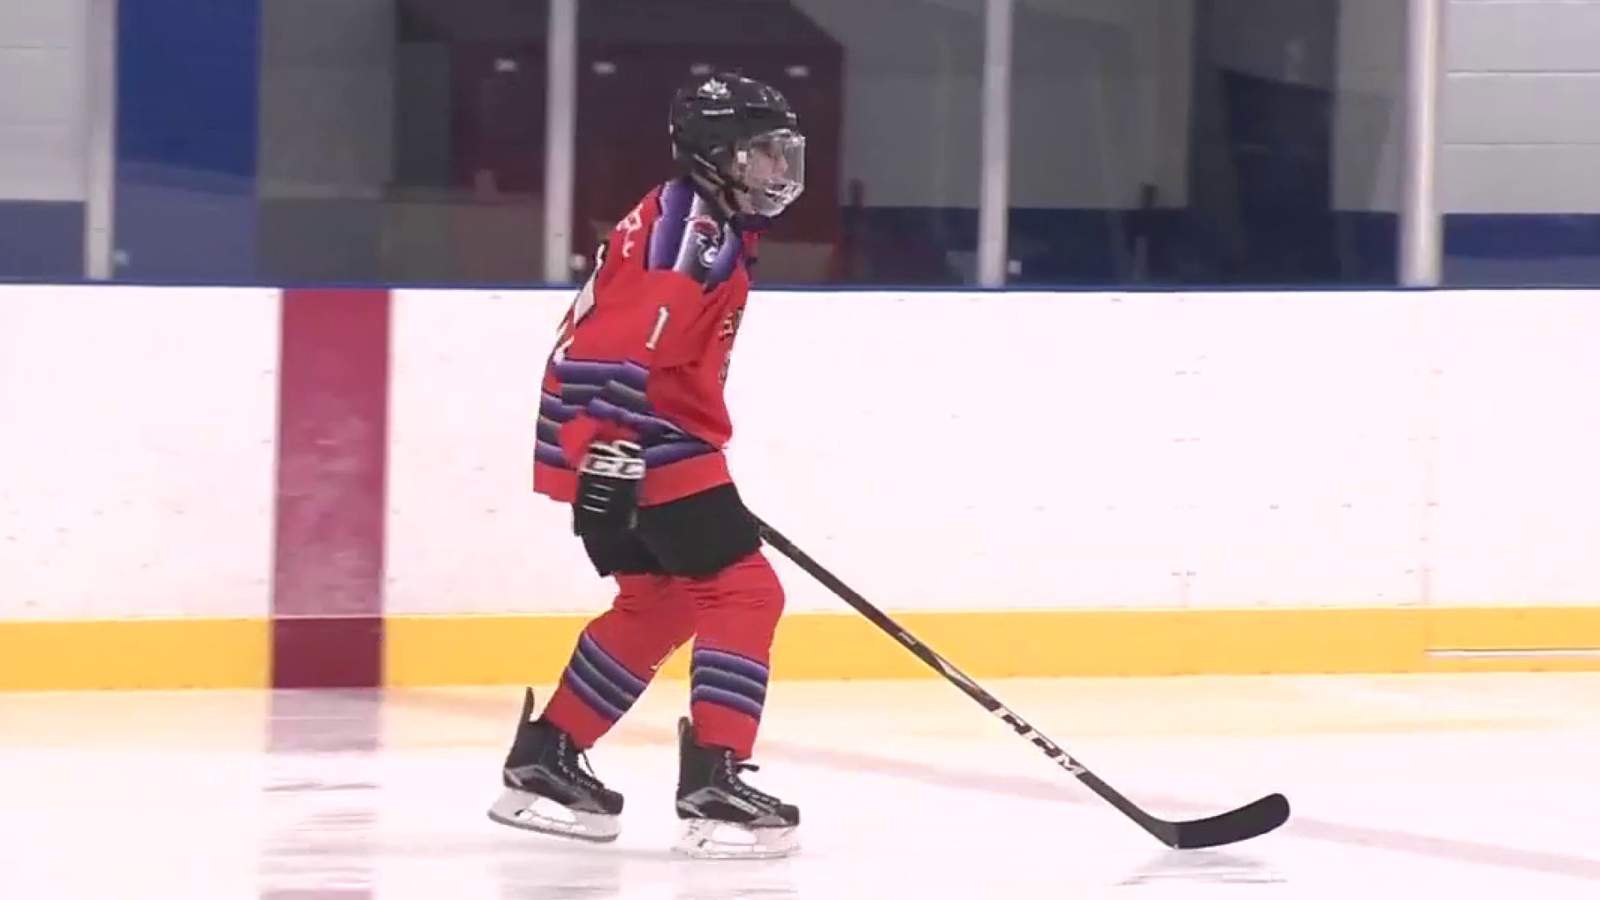 Whats Up South Texas!: Visually impaired kid inspires others to play blind hockey